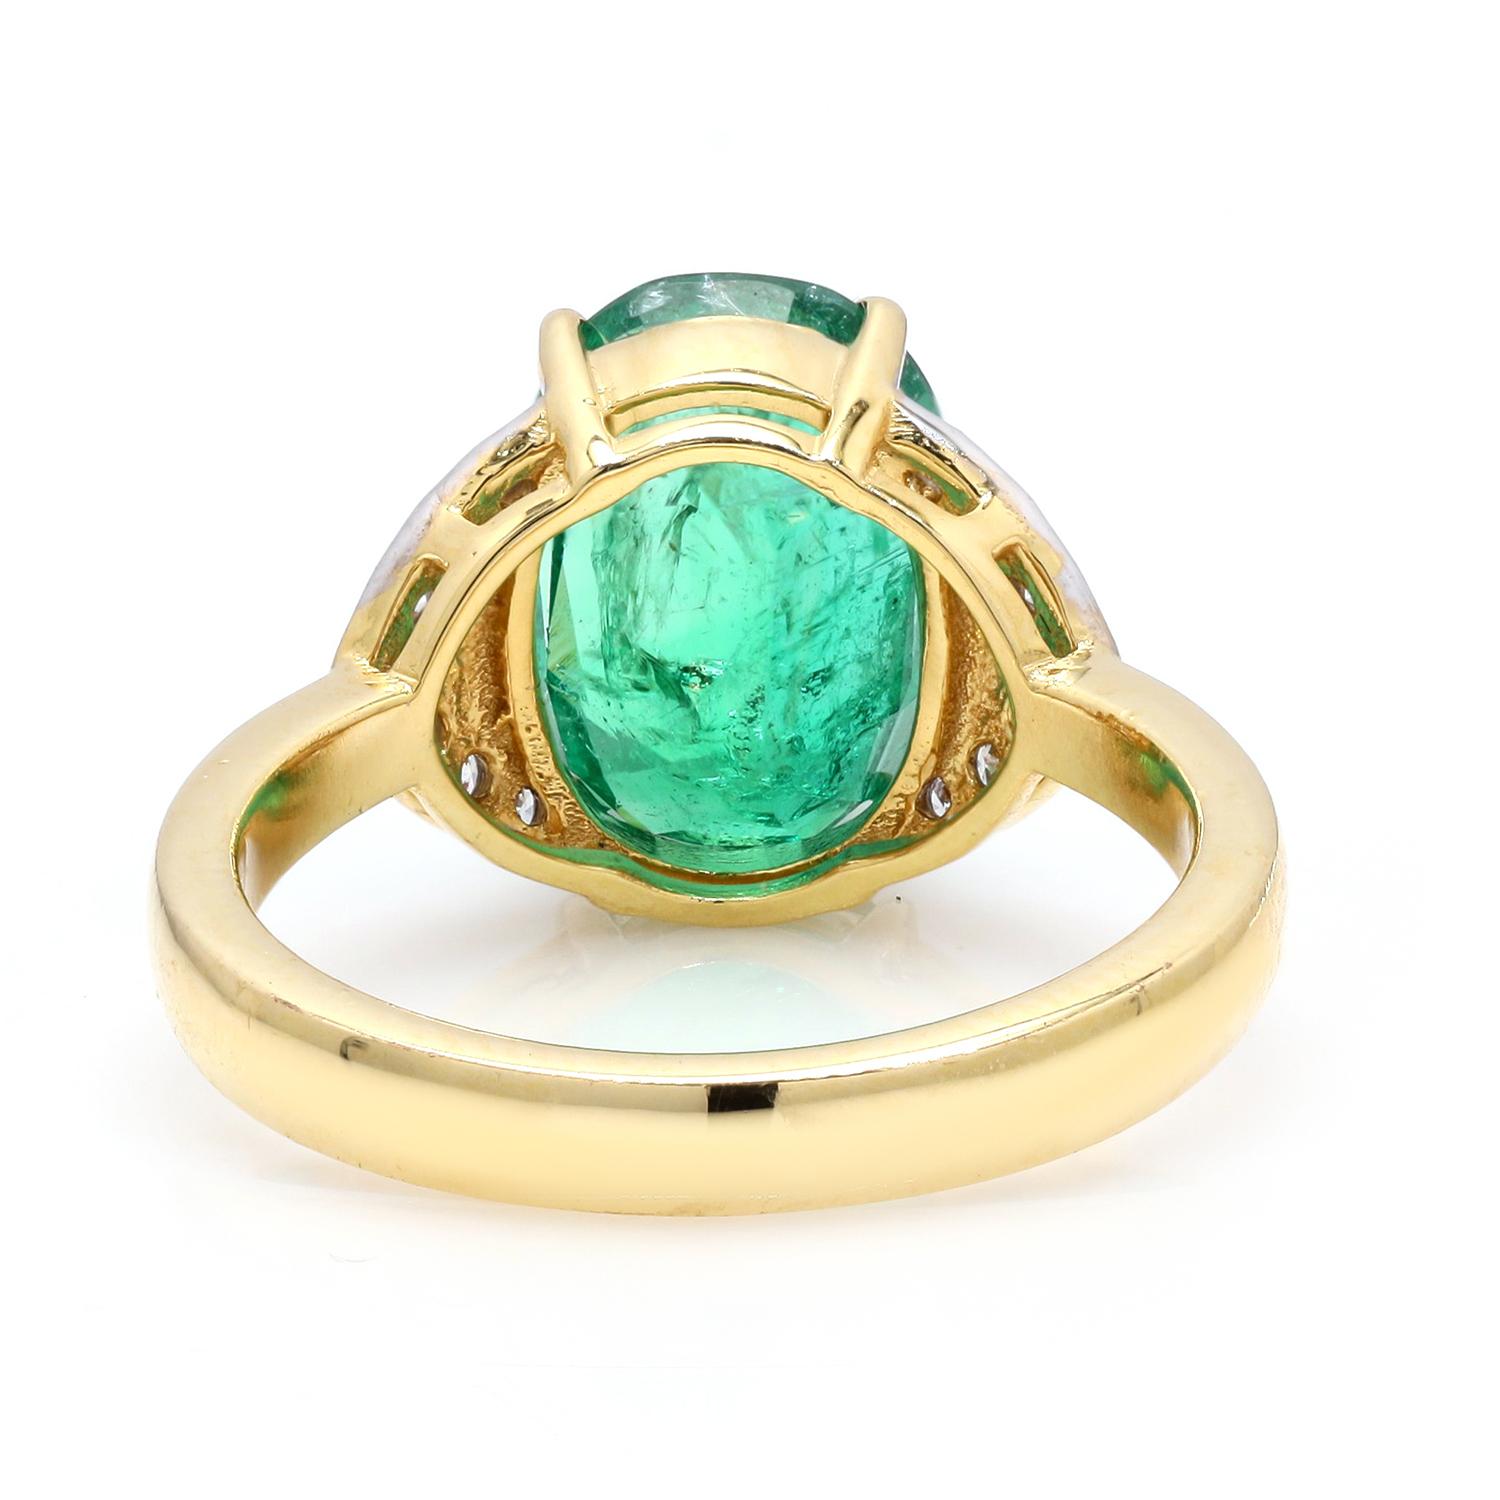 Contemporary Zambian Oval Emerald Cocktail Ring with Diamonds Made in 18k Yellow Gold For Sale